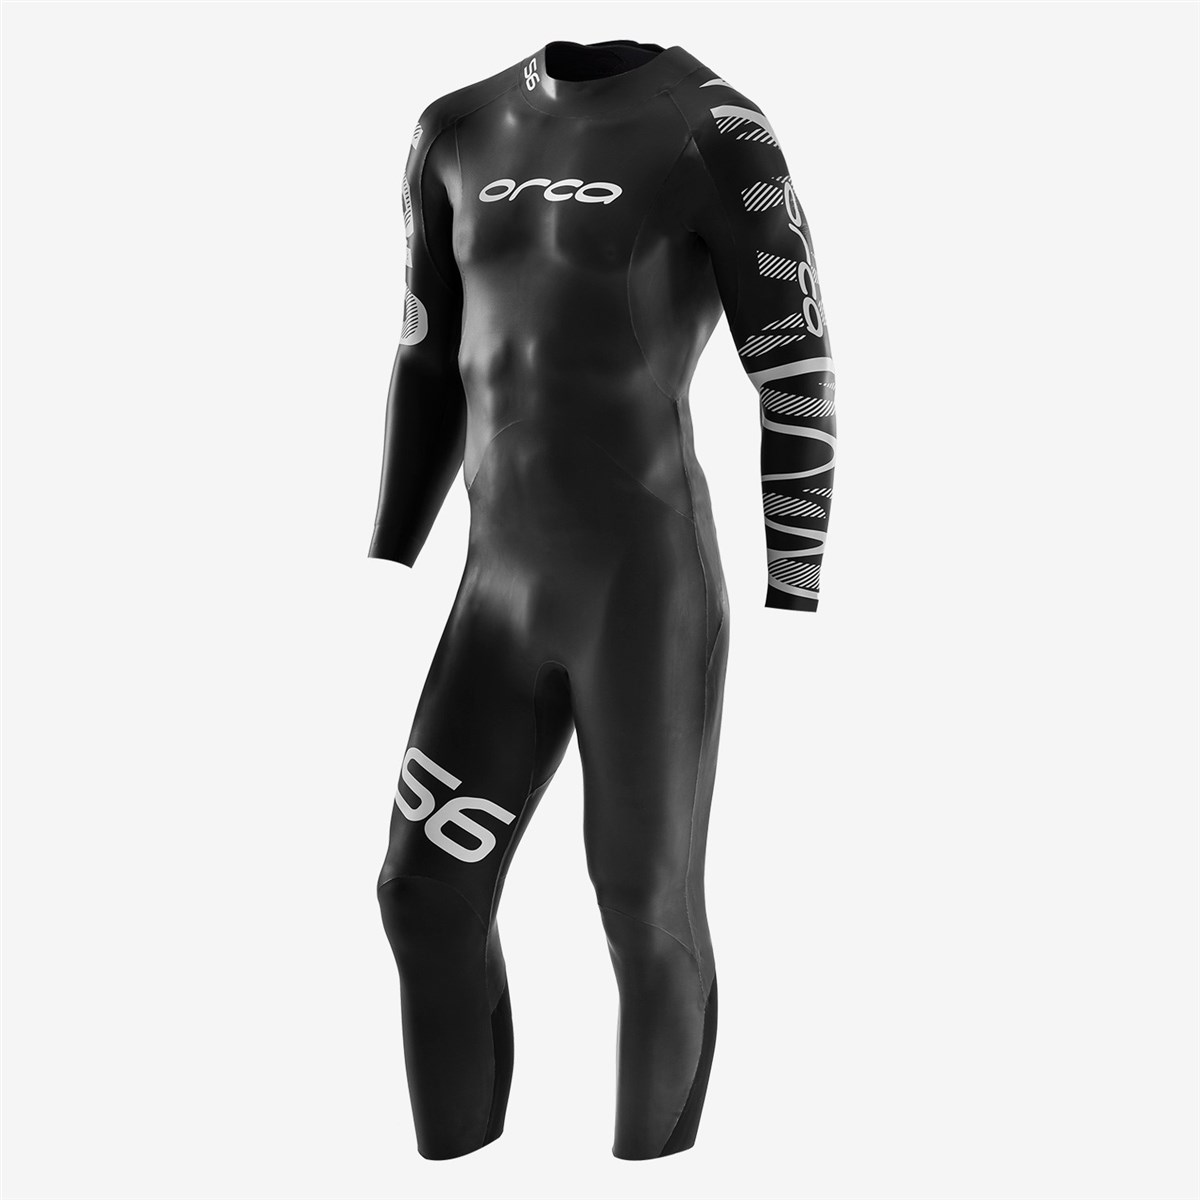 Orca S6 Full Sleeve Wetsuit product image